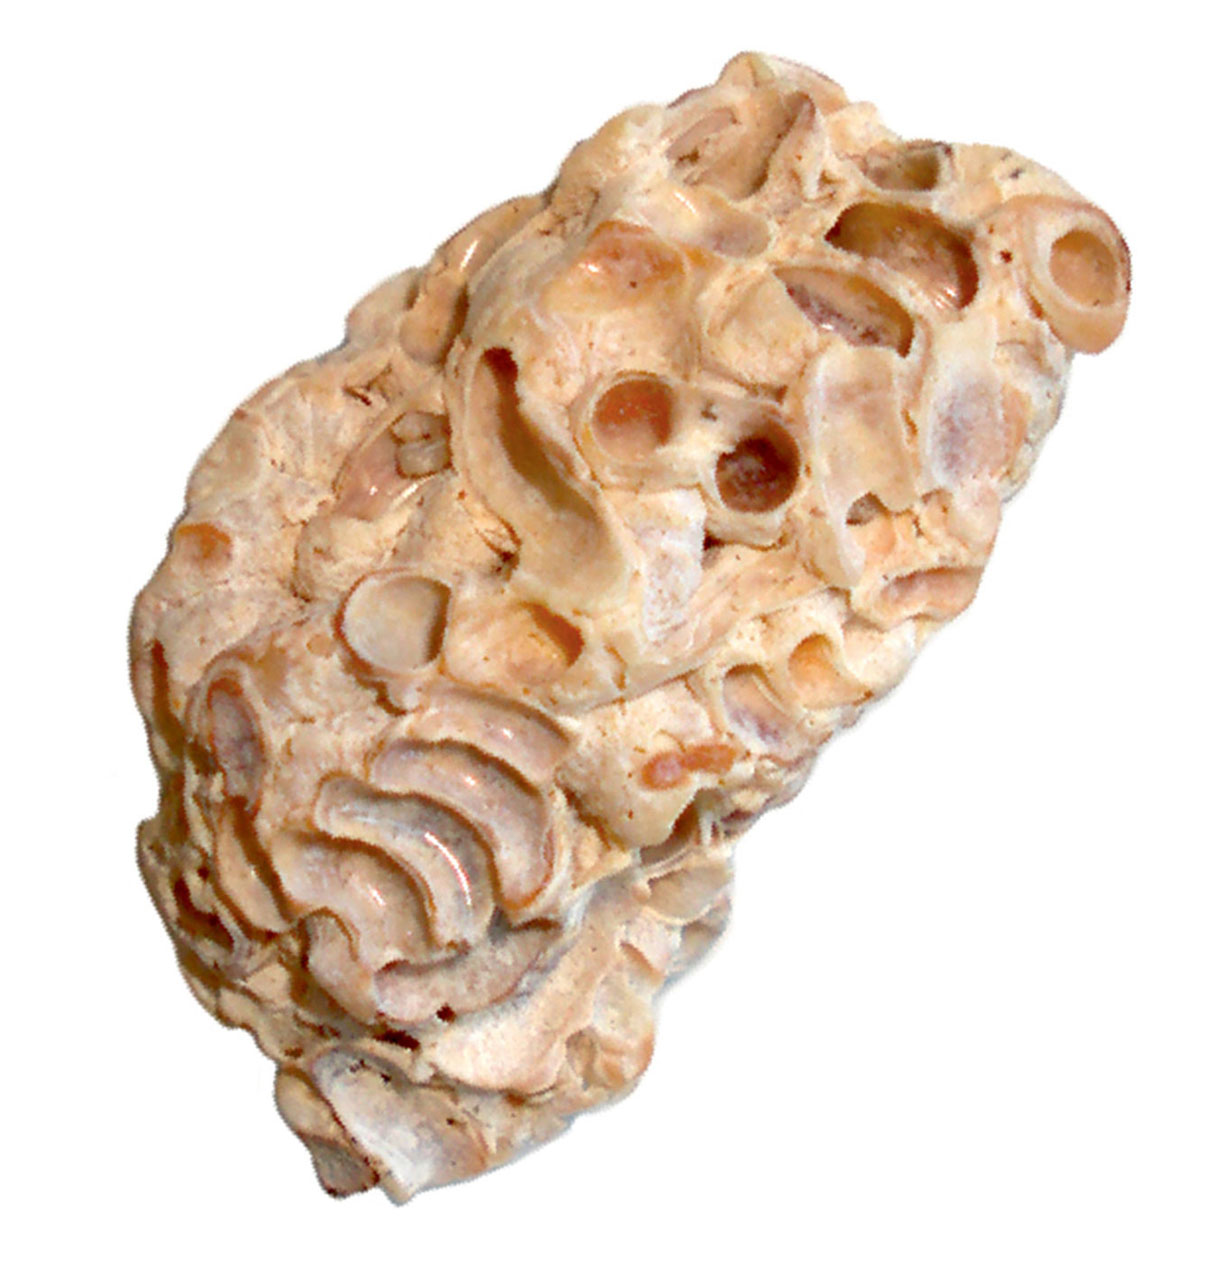 A photograph of a rock which resembles a small intestine. 